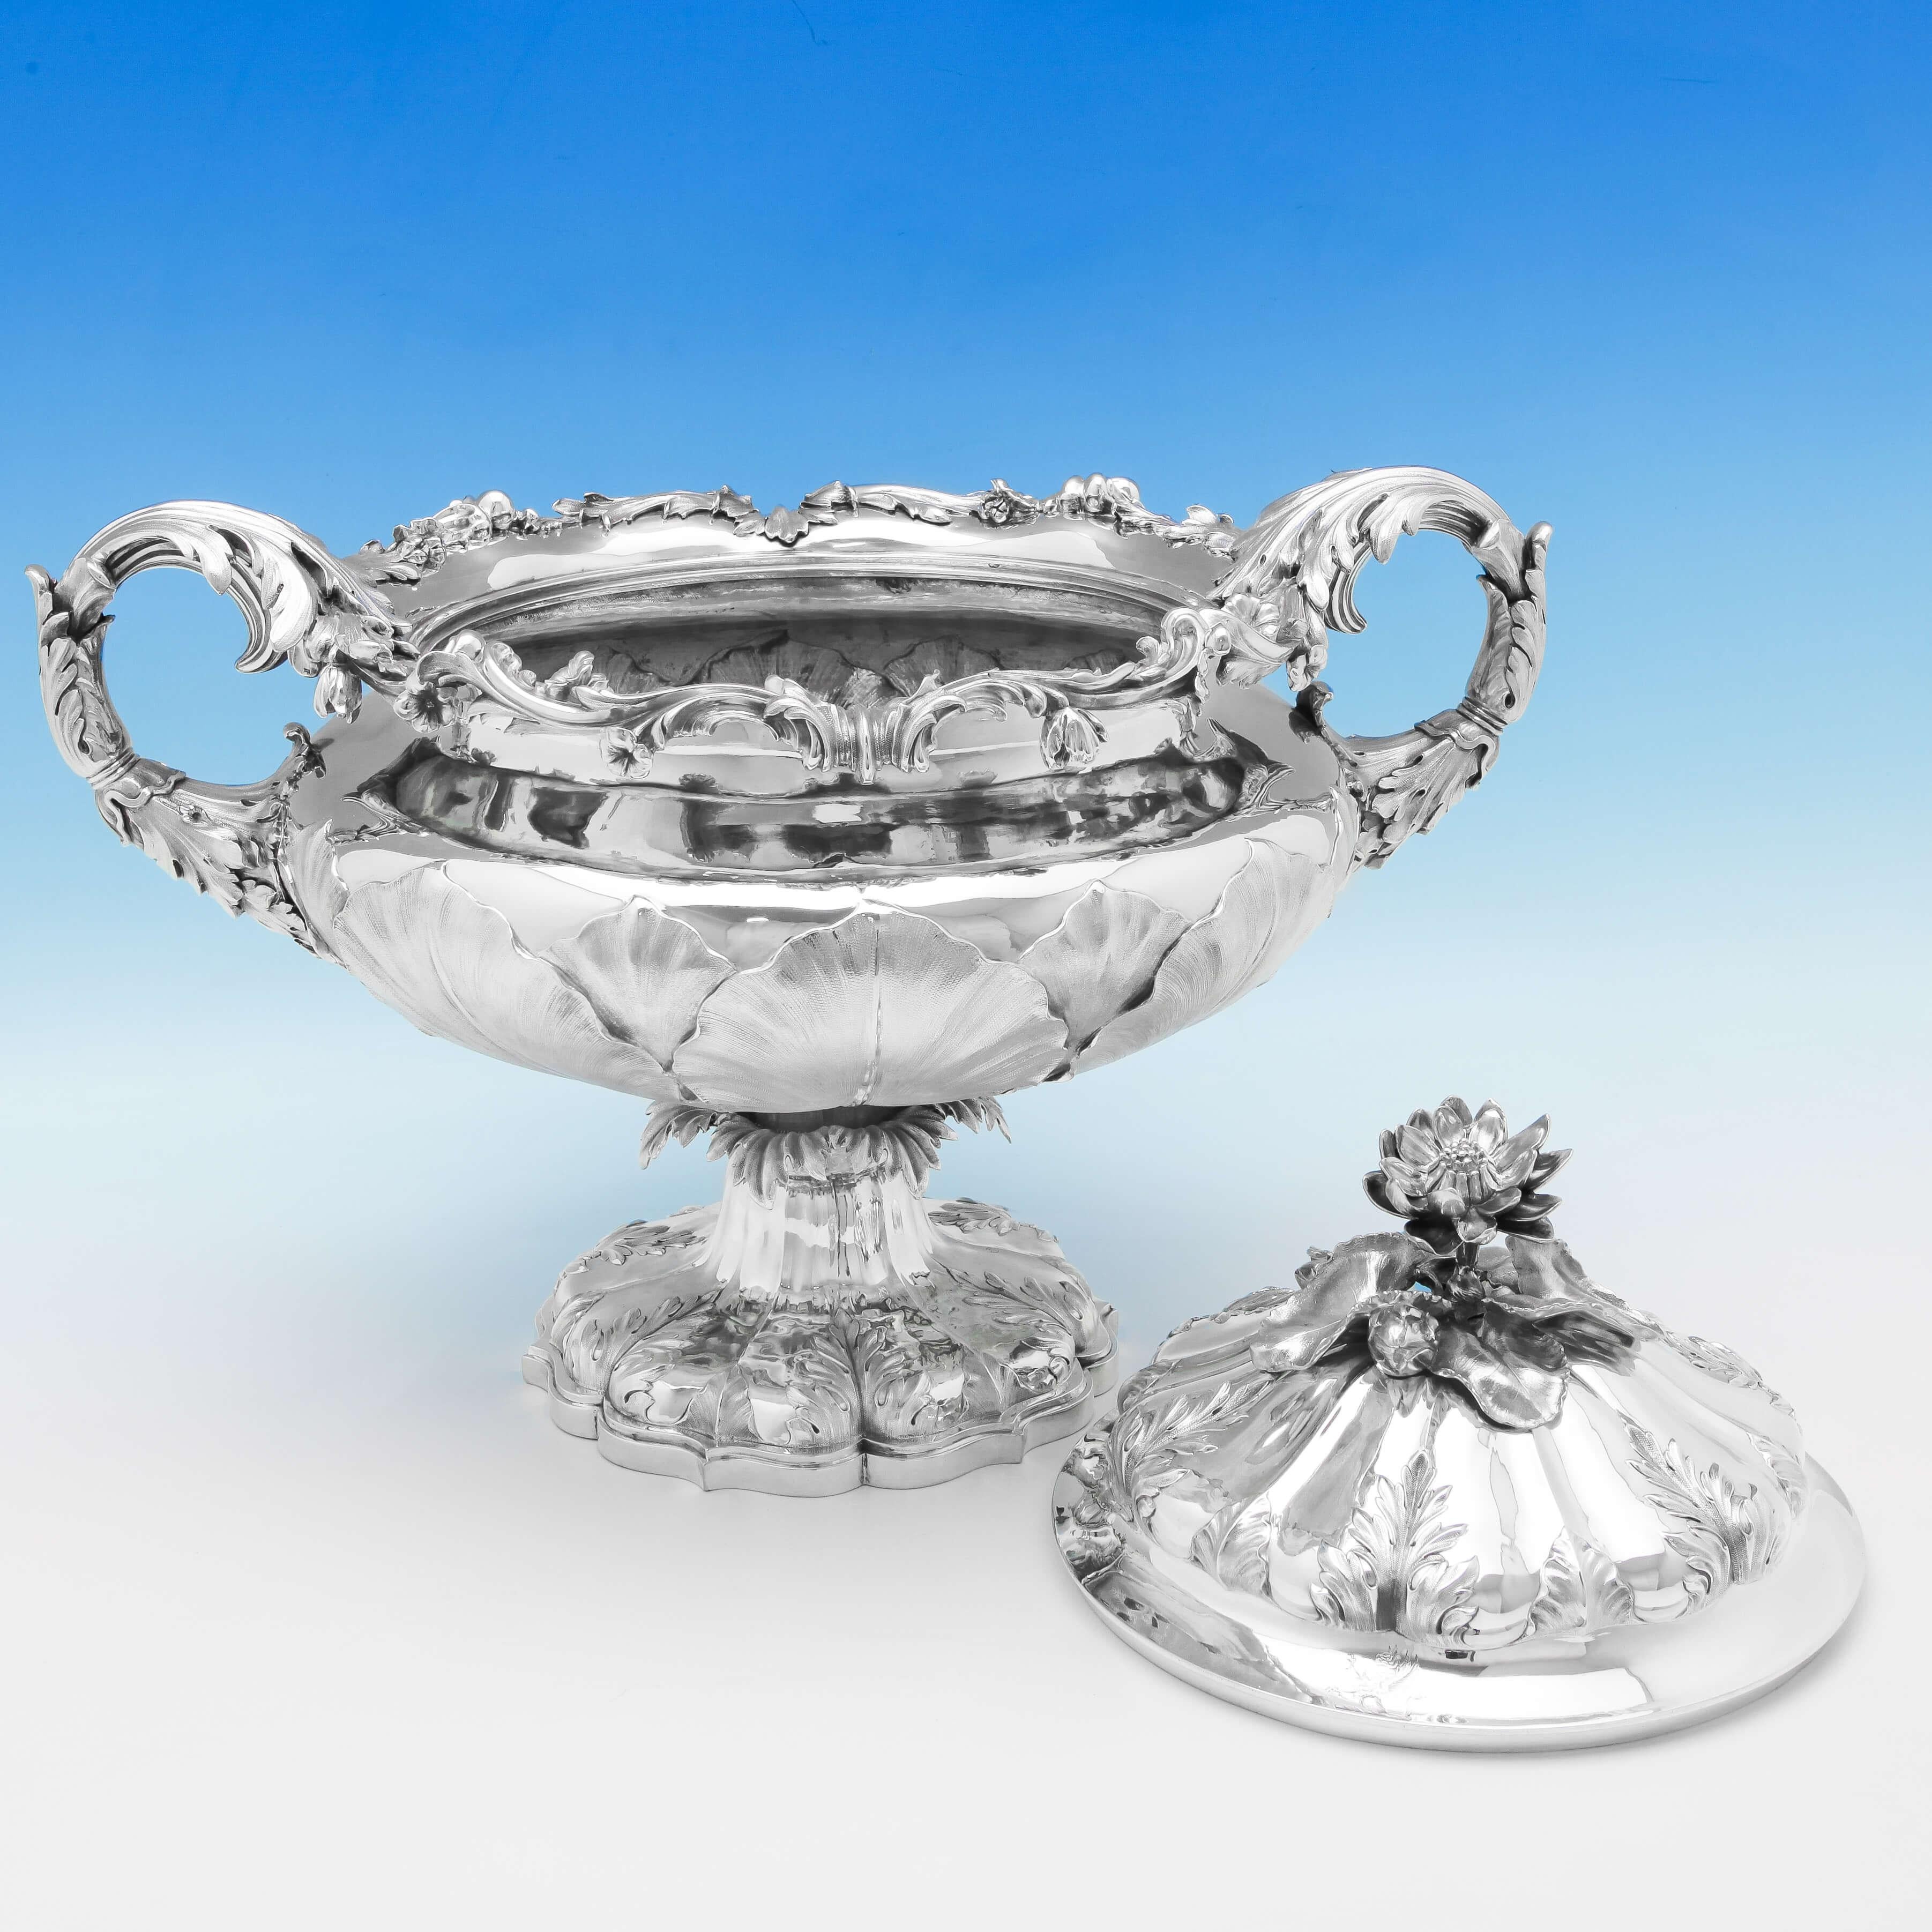 Hallmarked in London in 1839 by Barnards, this exquisite, Antique, Victorian, sterling silver soup tureen or Centrepiece, features wonderful chased decoration of leaves to the body, chased acanthus decoration to the foot and lid, a cast and applied